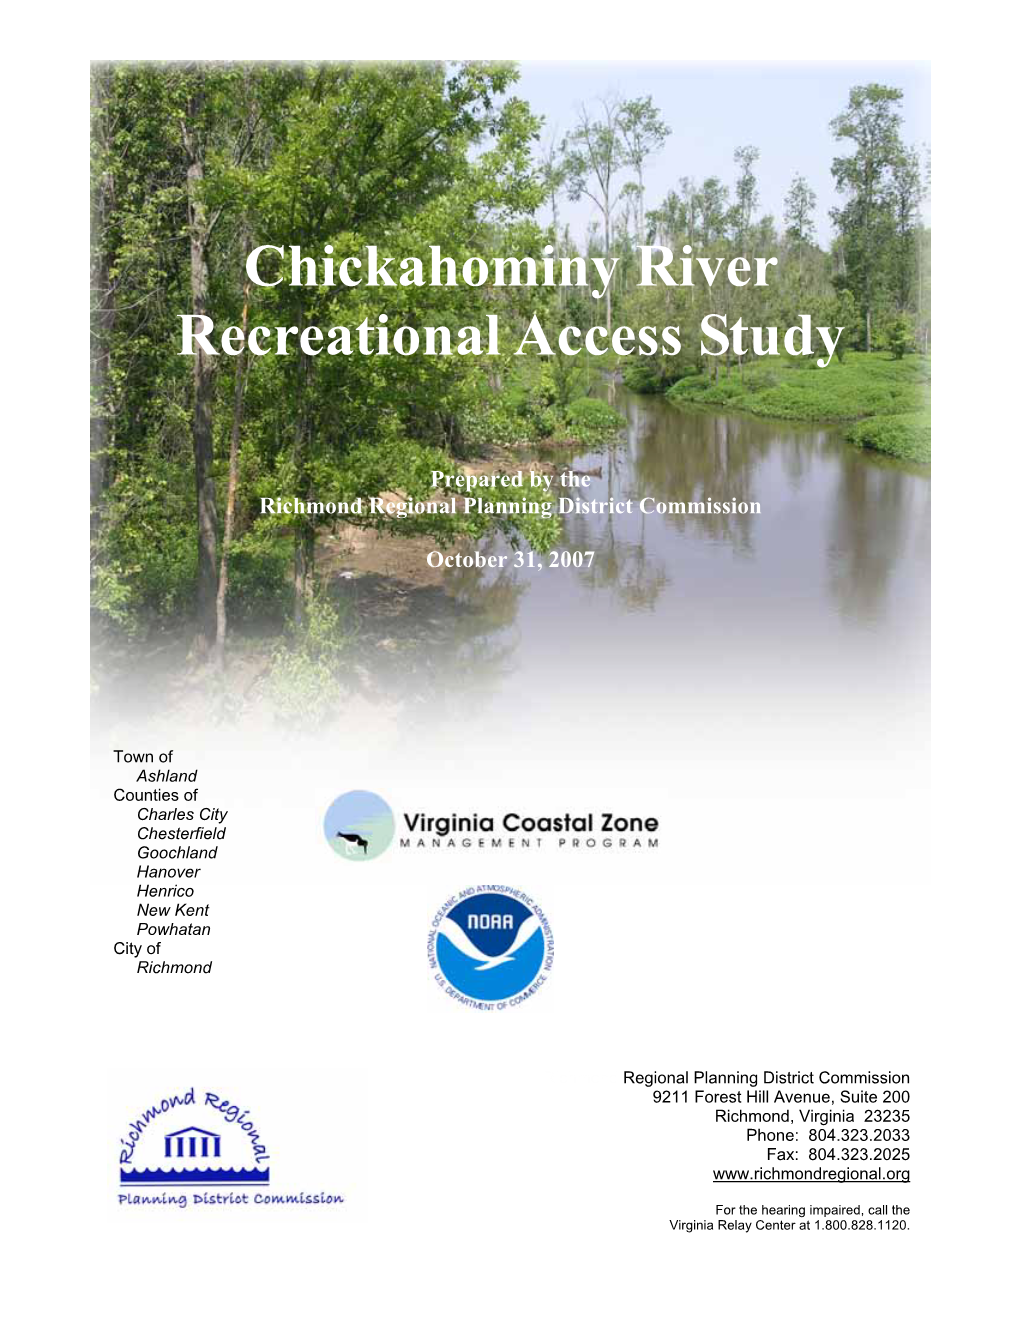 Chickahominy River Recreational Access Study